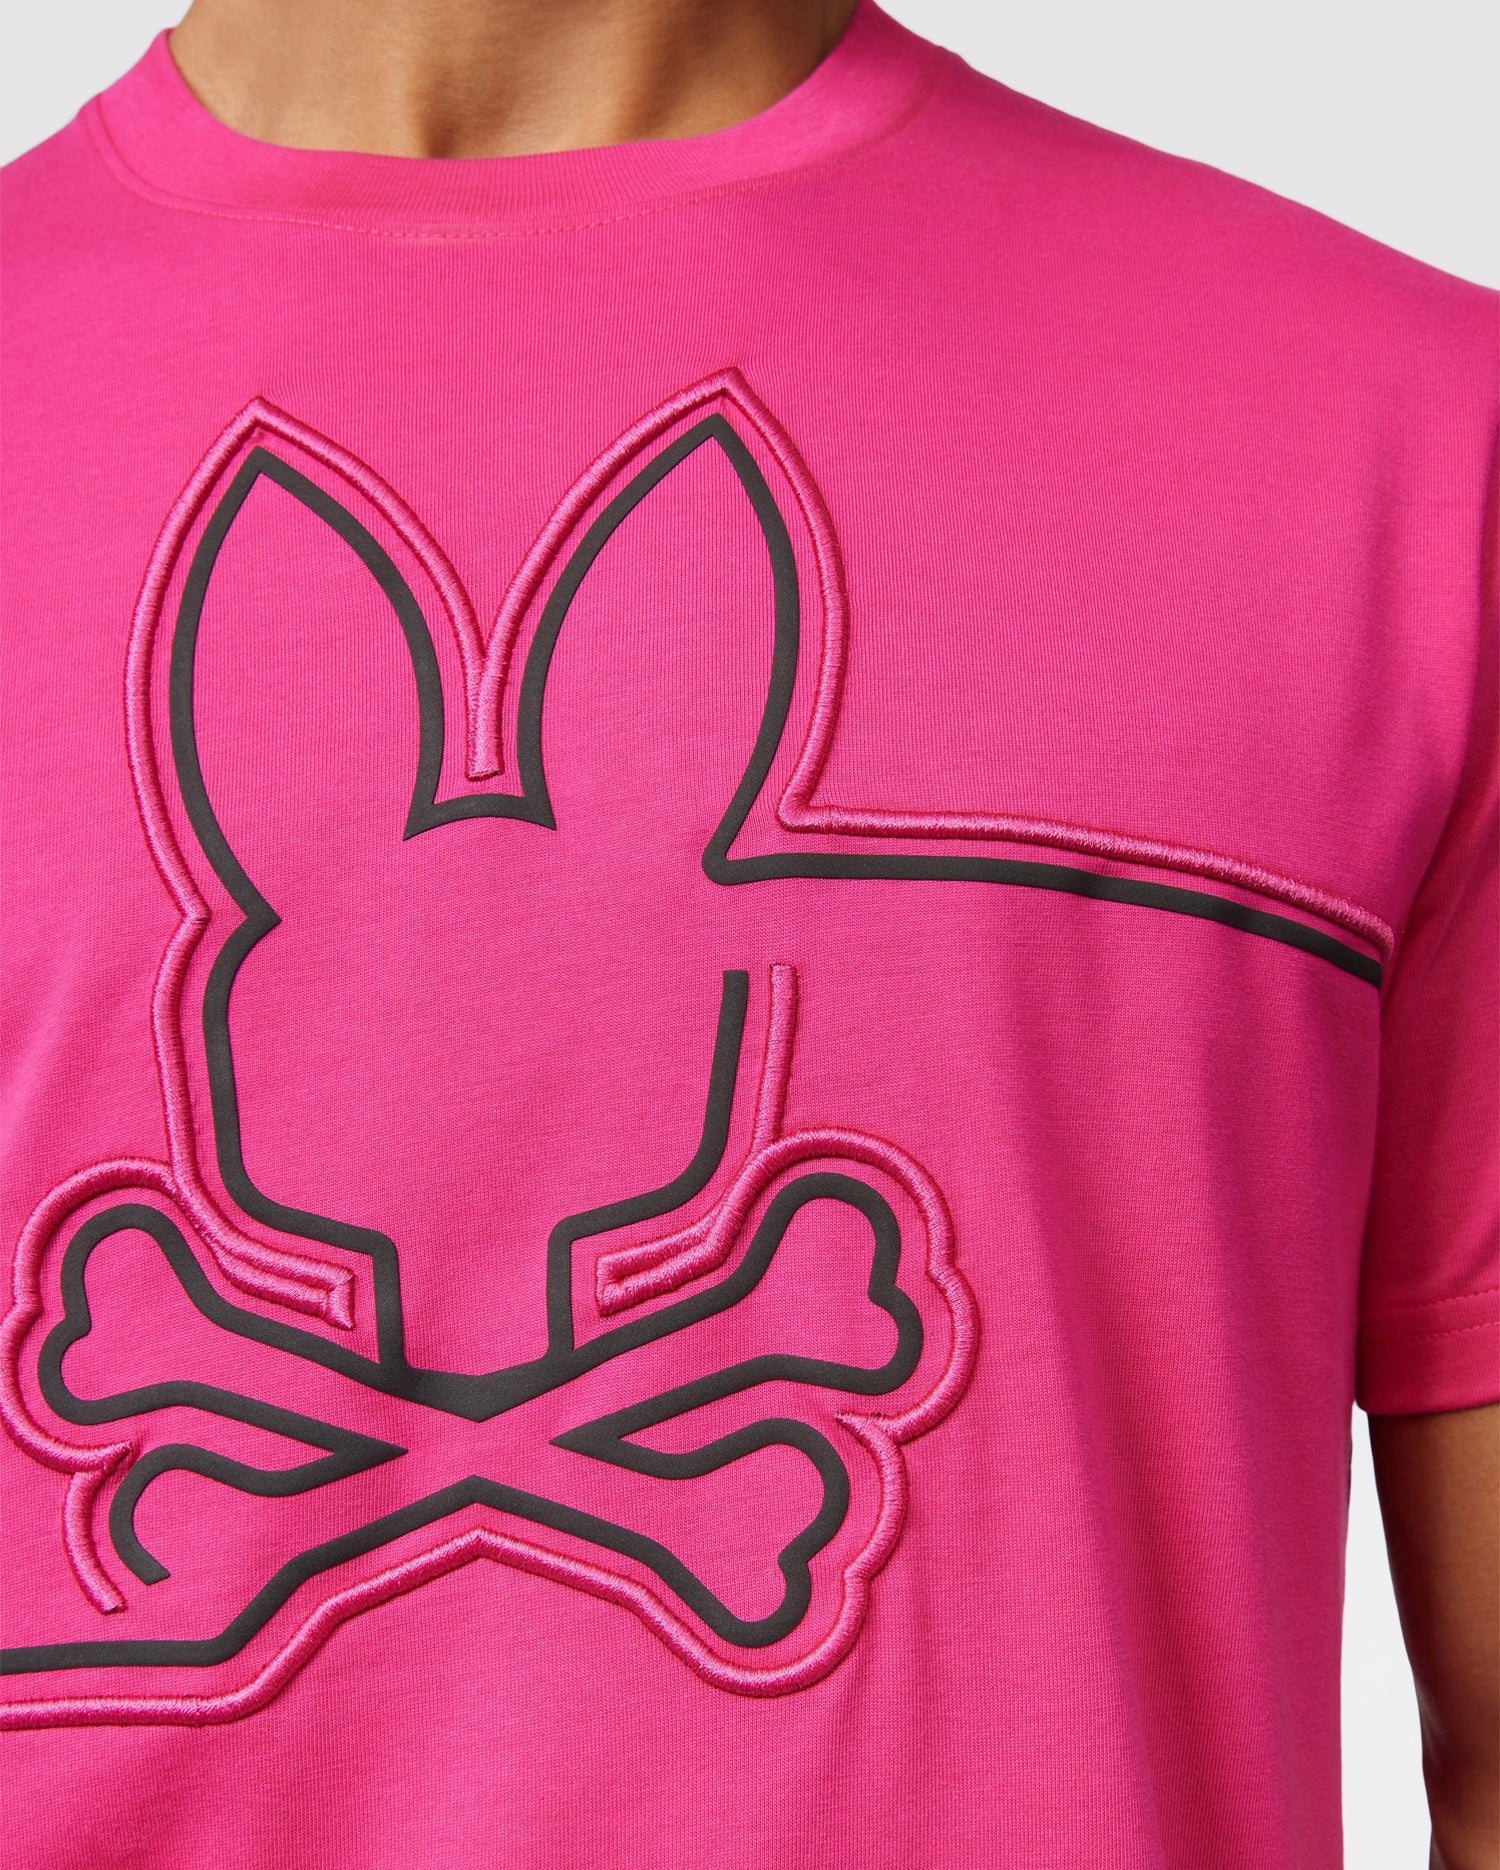 Graphic City Sports Chester Chicago Bunny Embroidered Tee | Psycho